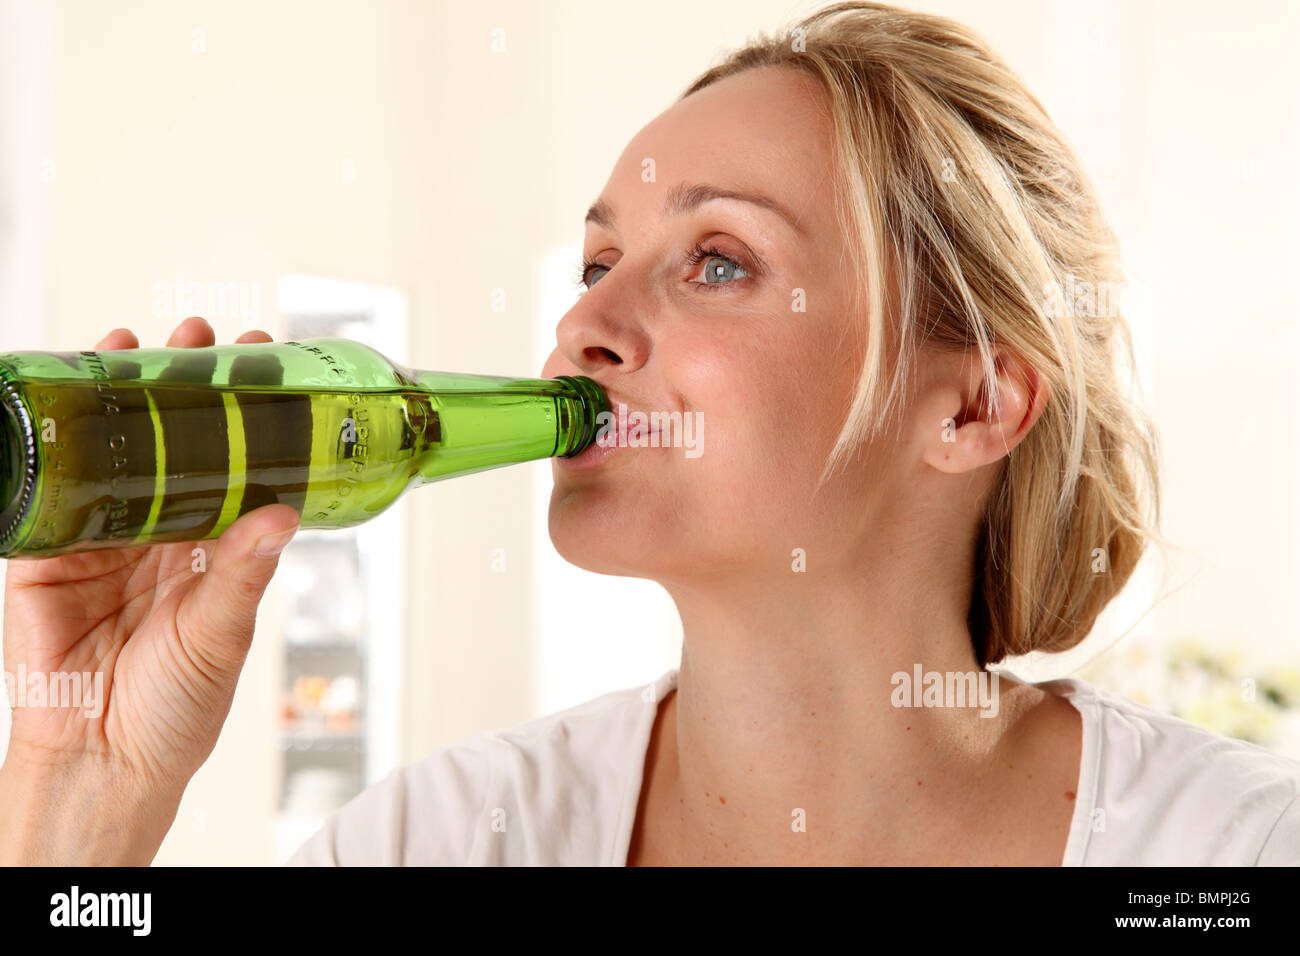 WOMAN DRINKING BEER FROM BOTTLE Stock Photo